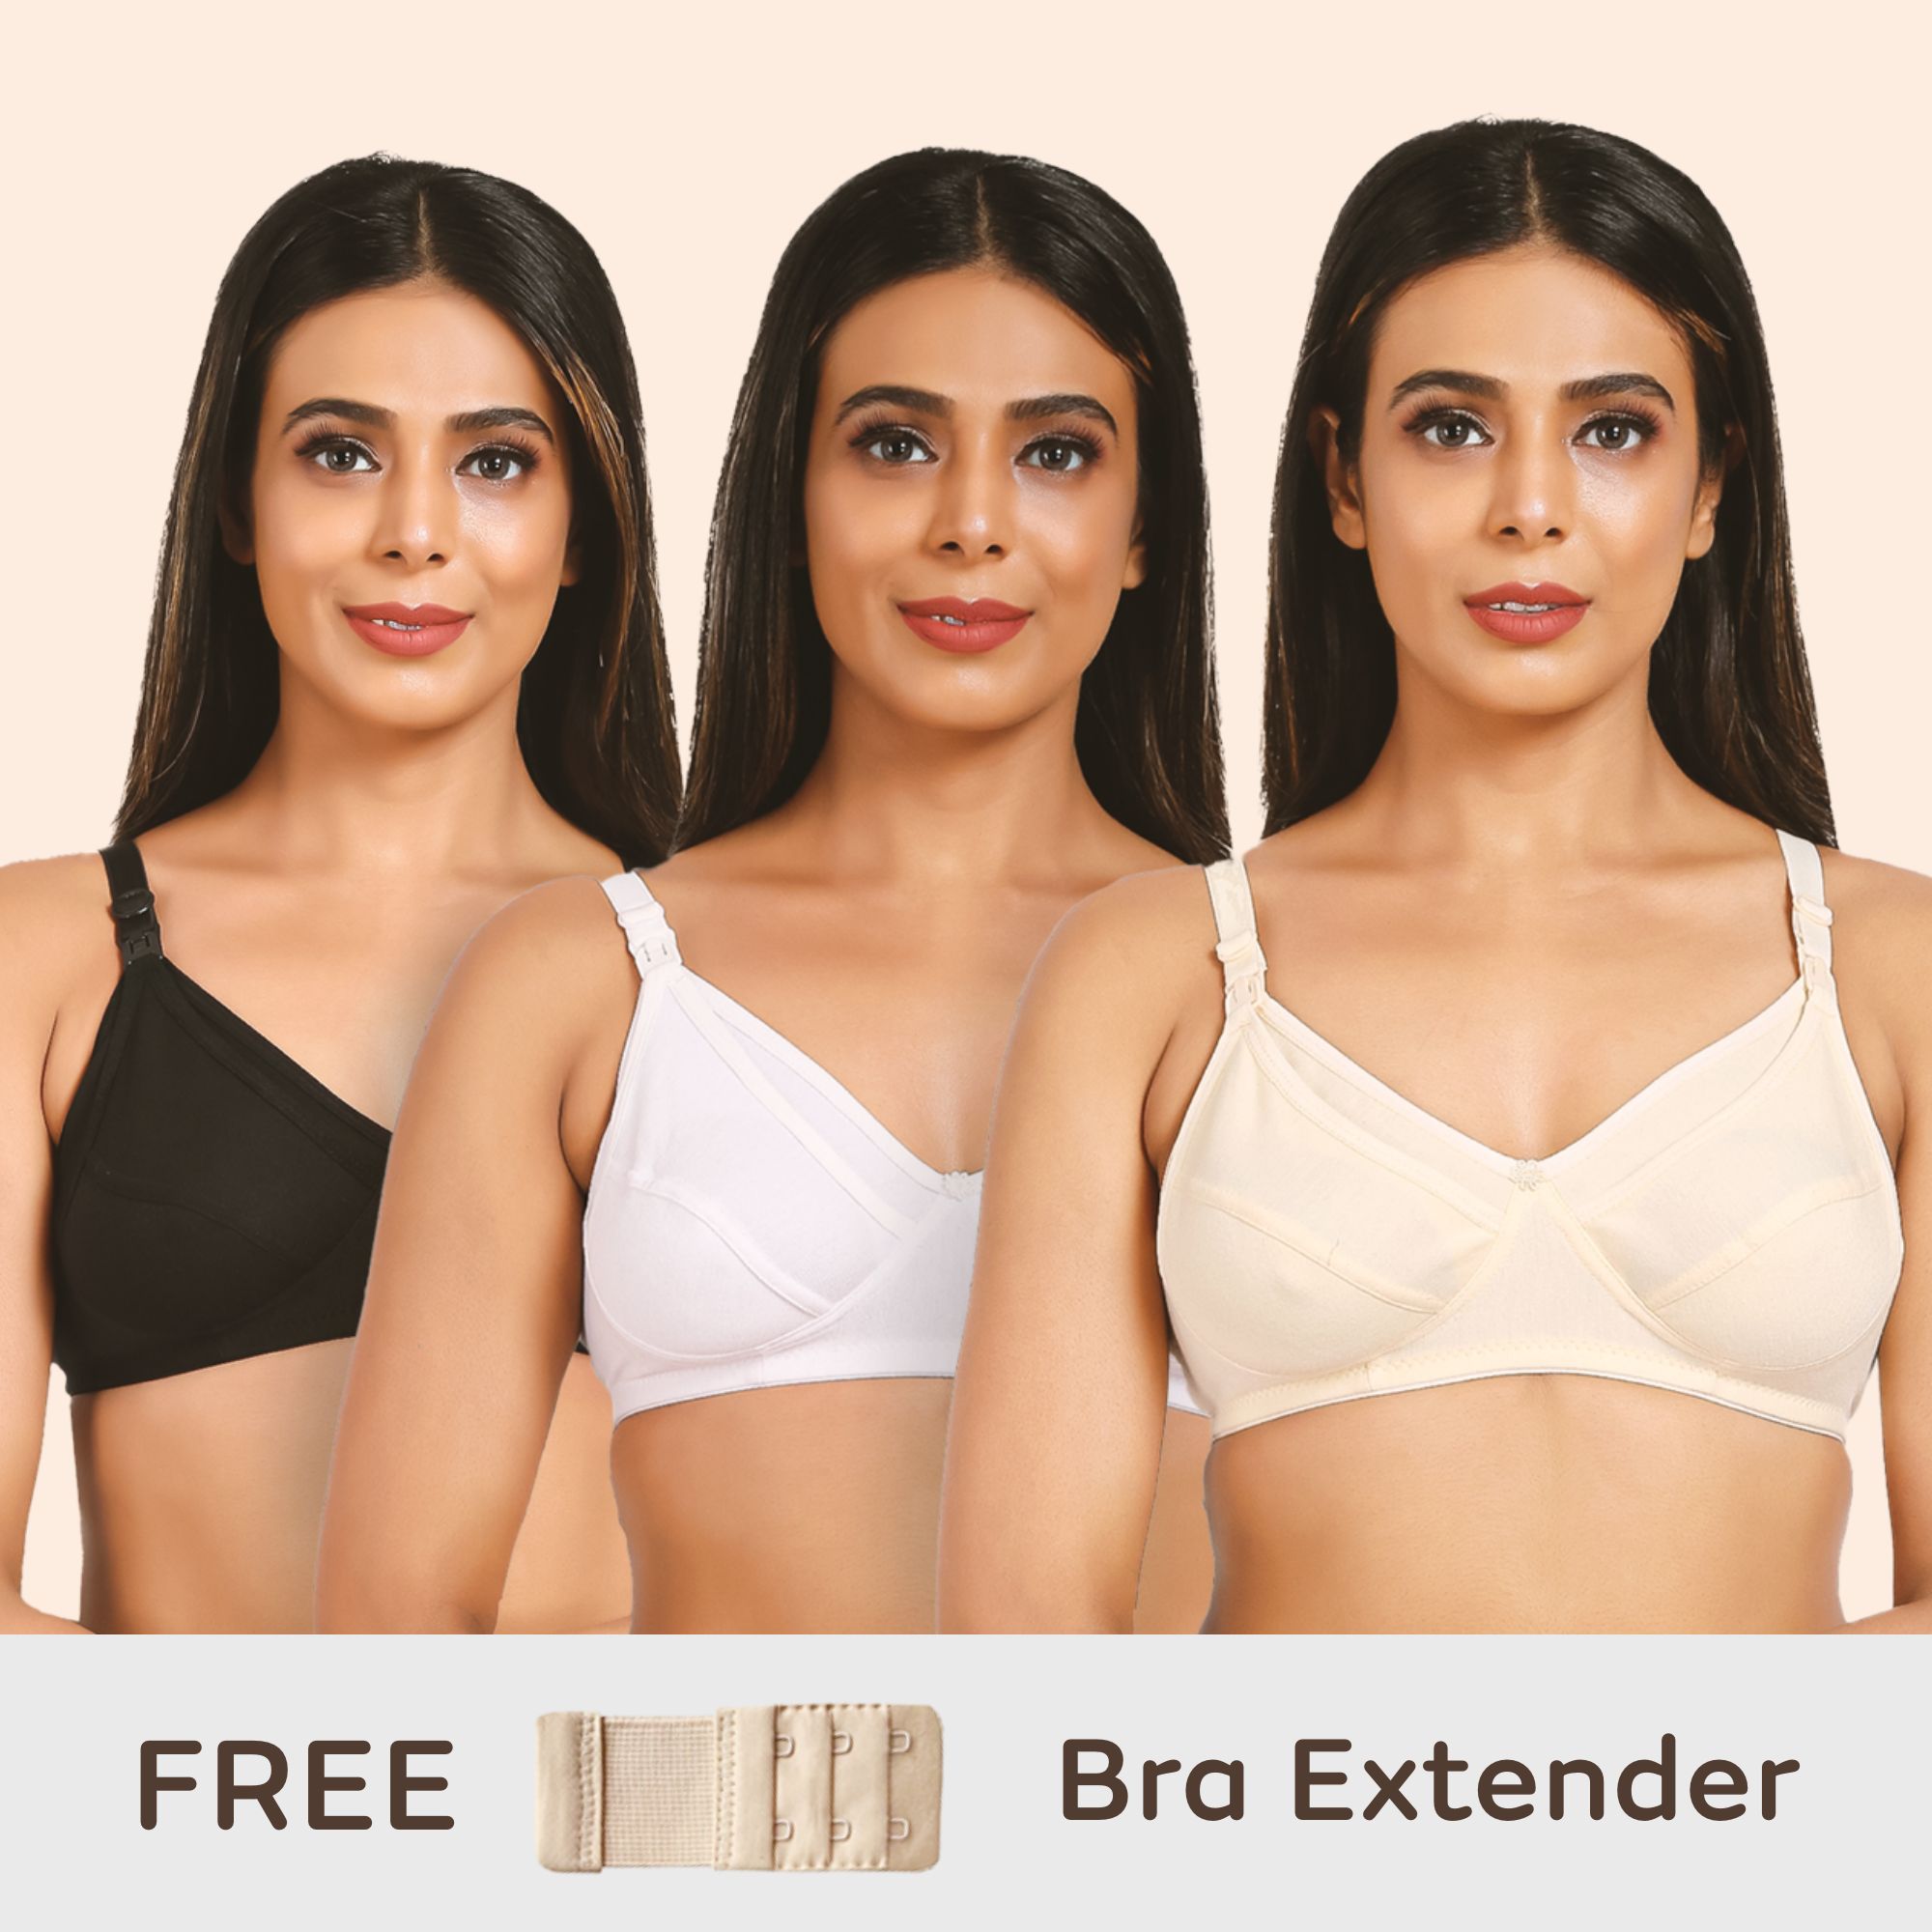 Maternity/Nursing Bras Non-Wired, Non-Padded - Pack of 3 with free Bra Extender (Classic Black, Classic White, Magnolia Cream) 42 B